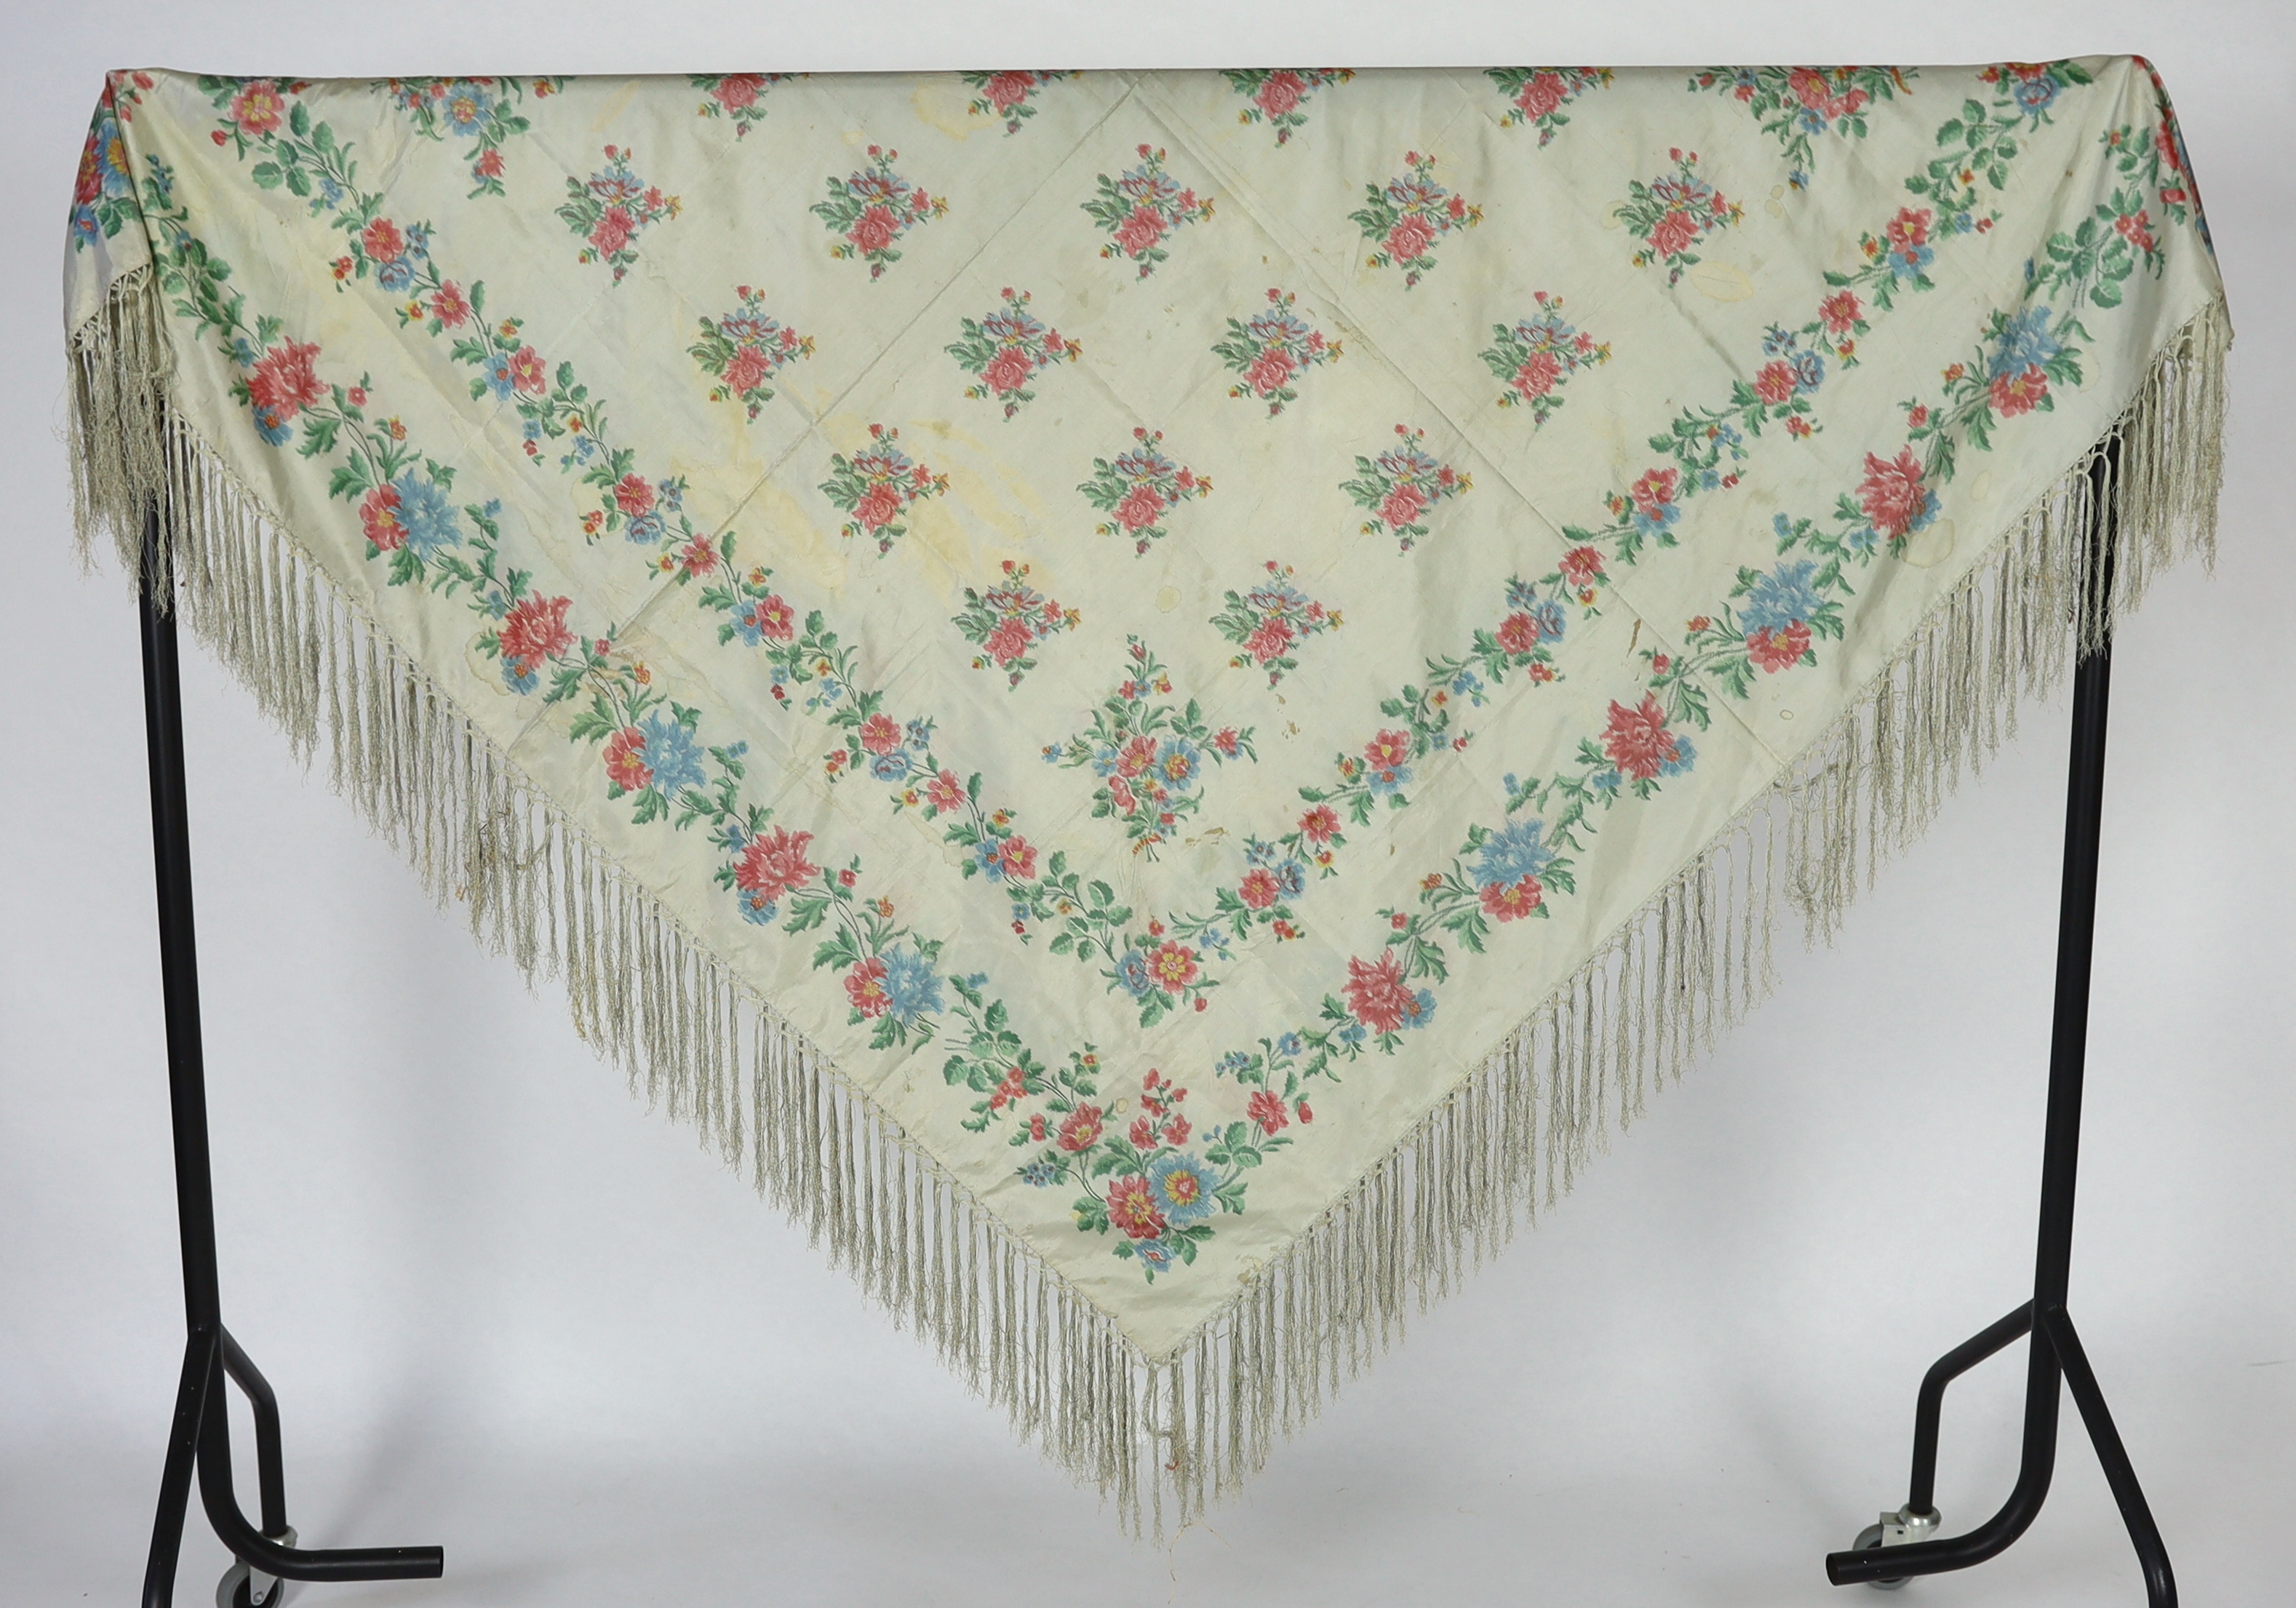 A French silk shawl, c.1800-1840, of a type modelled by Madame Recamier in the painting by François Gerard, printed on the warp thread into a rose pattern, with long fringing, 174 x 170cm